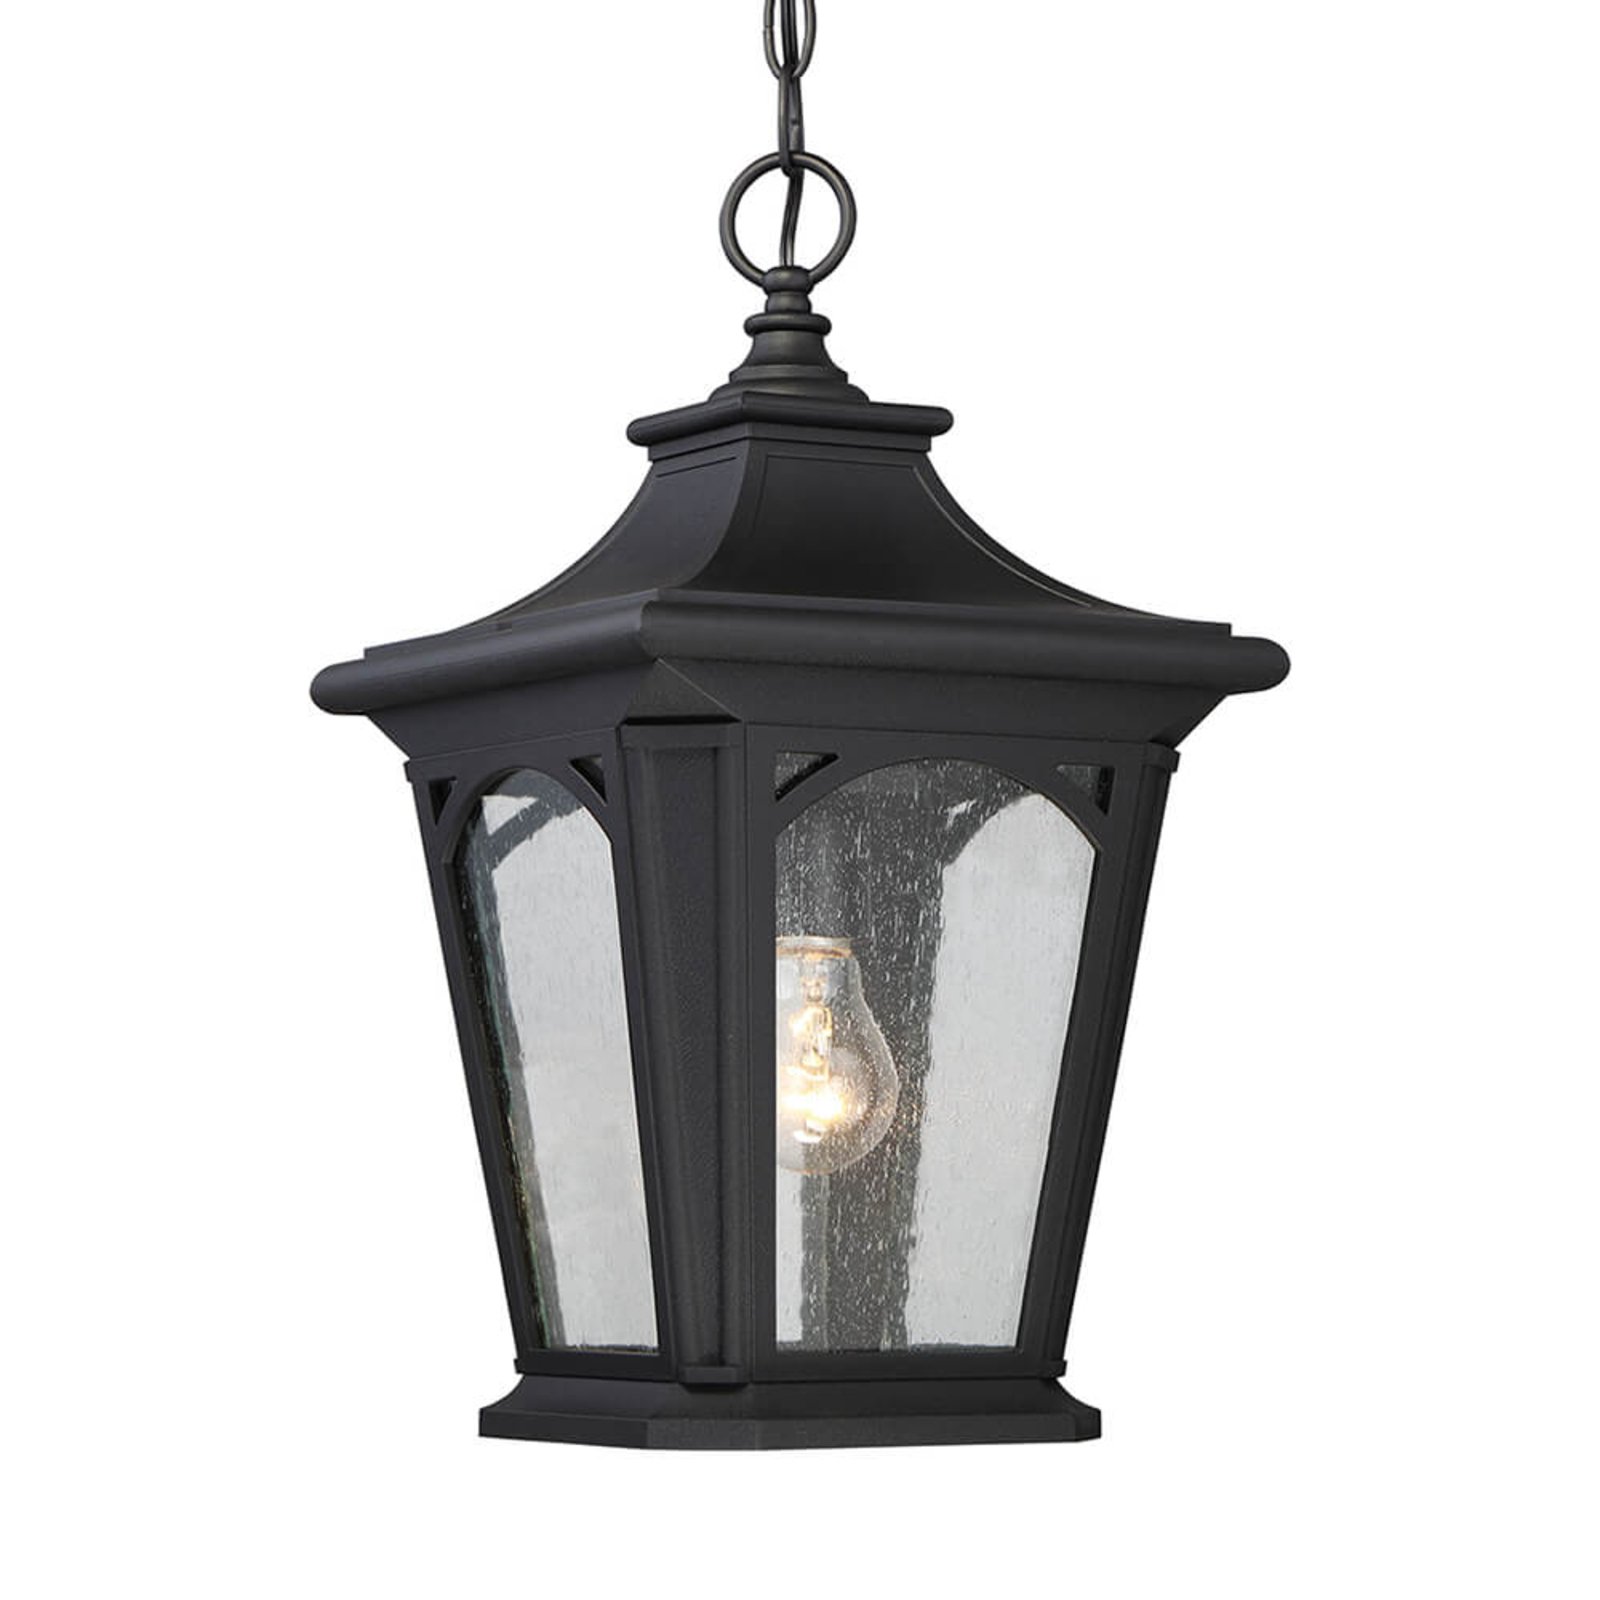 Chain suspension - Bedford outdoor hanging light